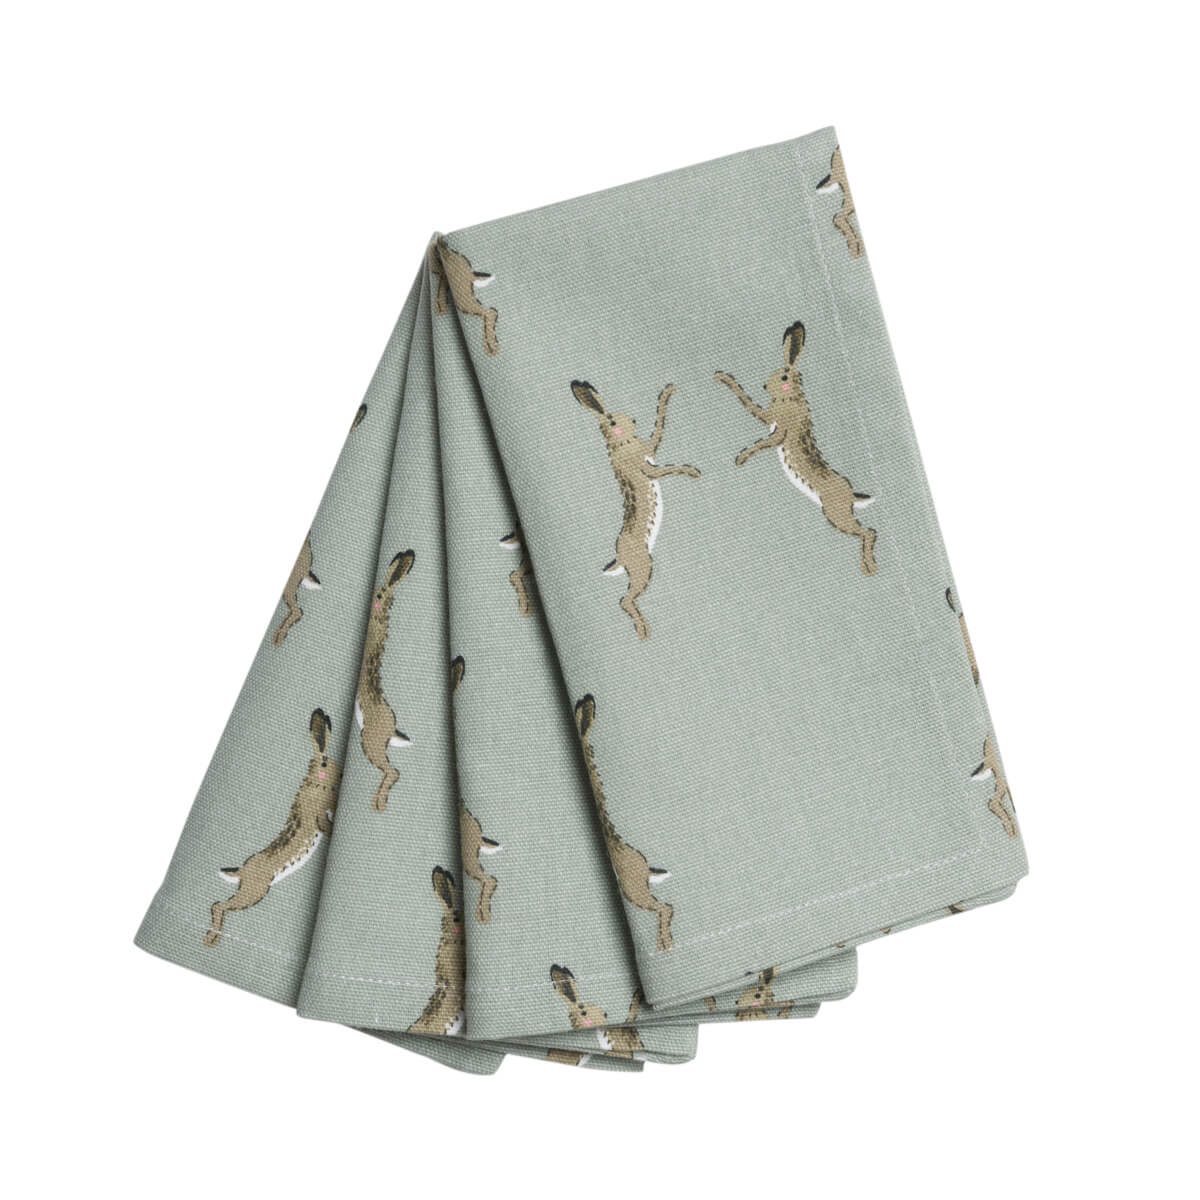 cotton napkins feature Sophie Allports Boxing Hare design, come as a set of four perfect for any kitchen or dining table